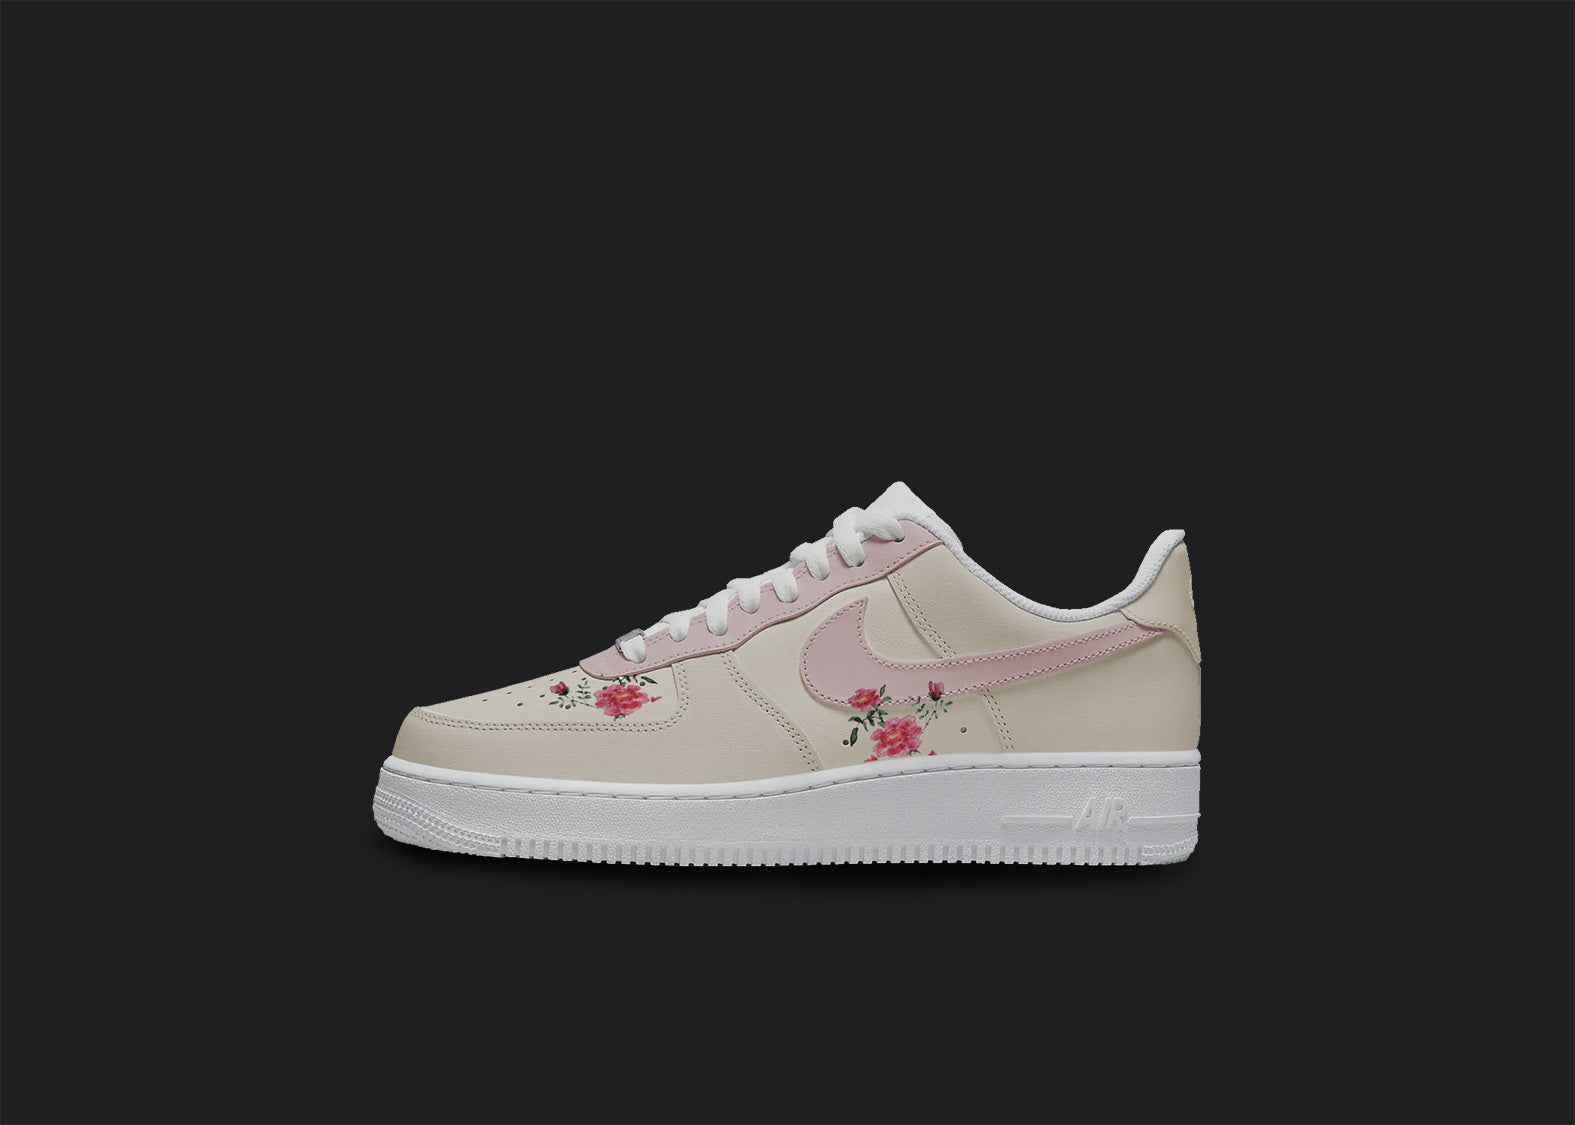 The image is of a Custom Nike Air force 1 sneaker on a blank black background. The white custom sneaker has a Pink floral nike logo design.